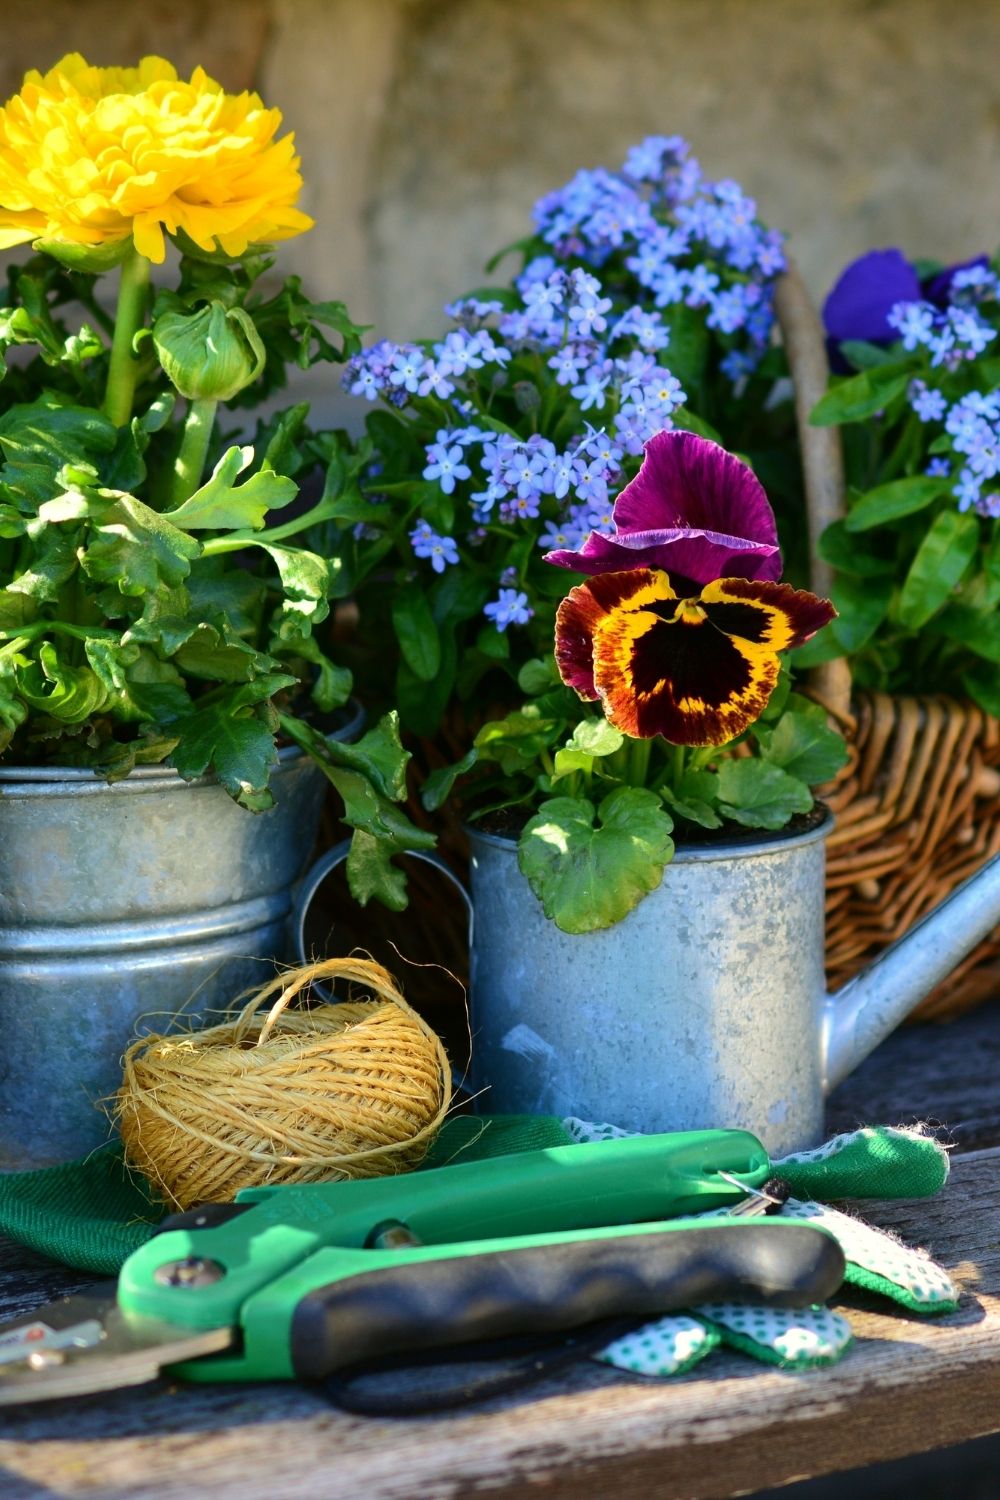 Top Hacks That Will Make Your Garden More Beautiful